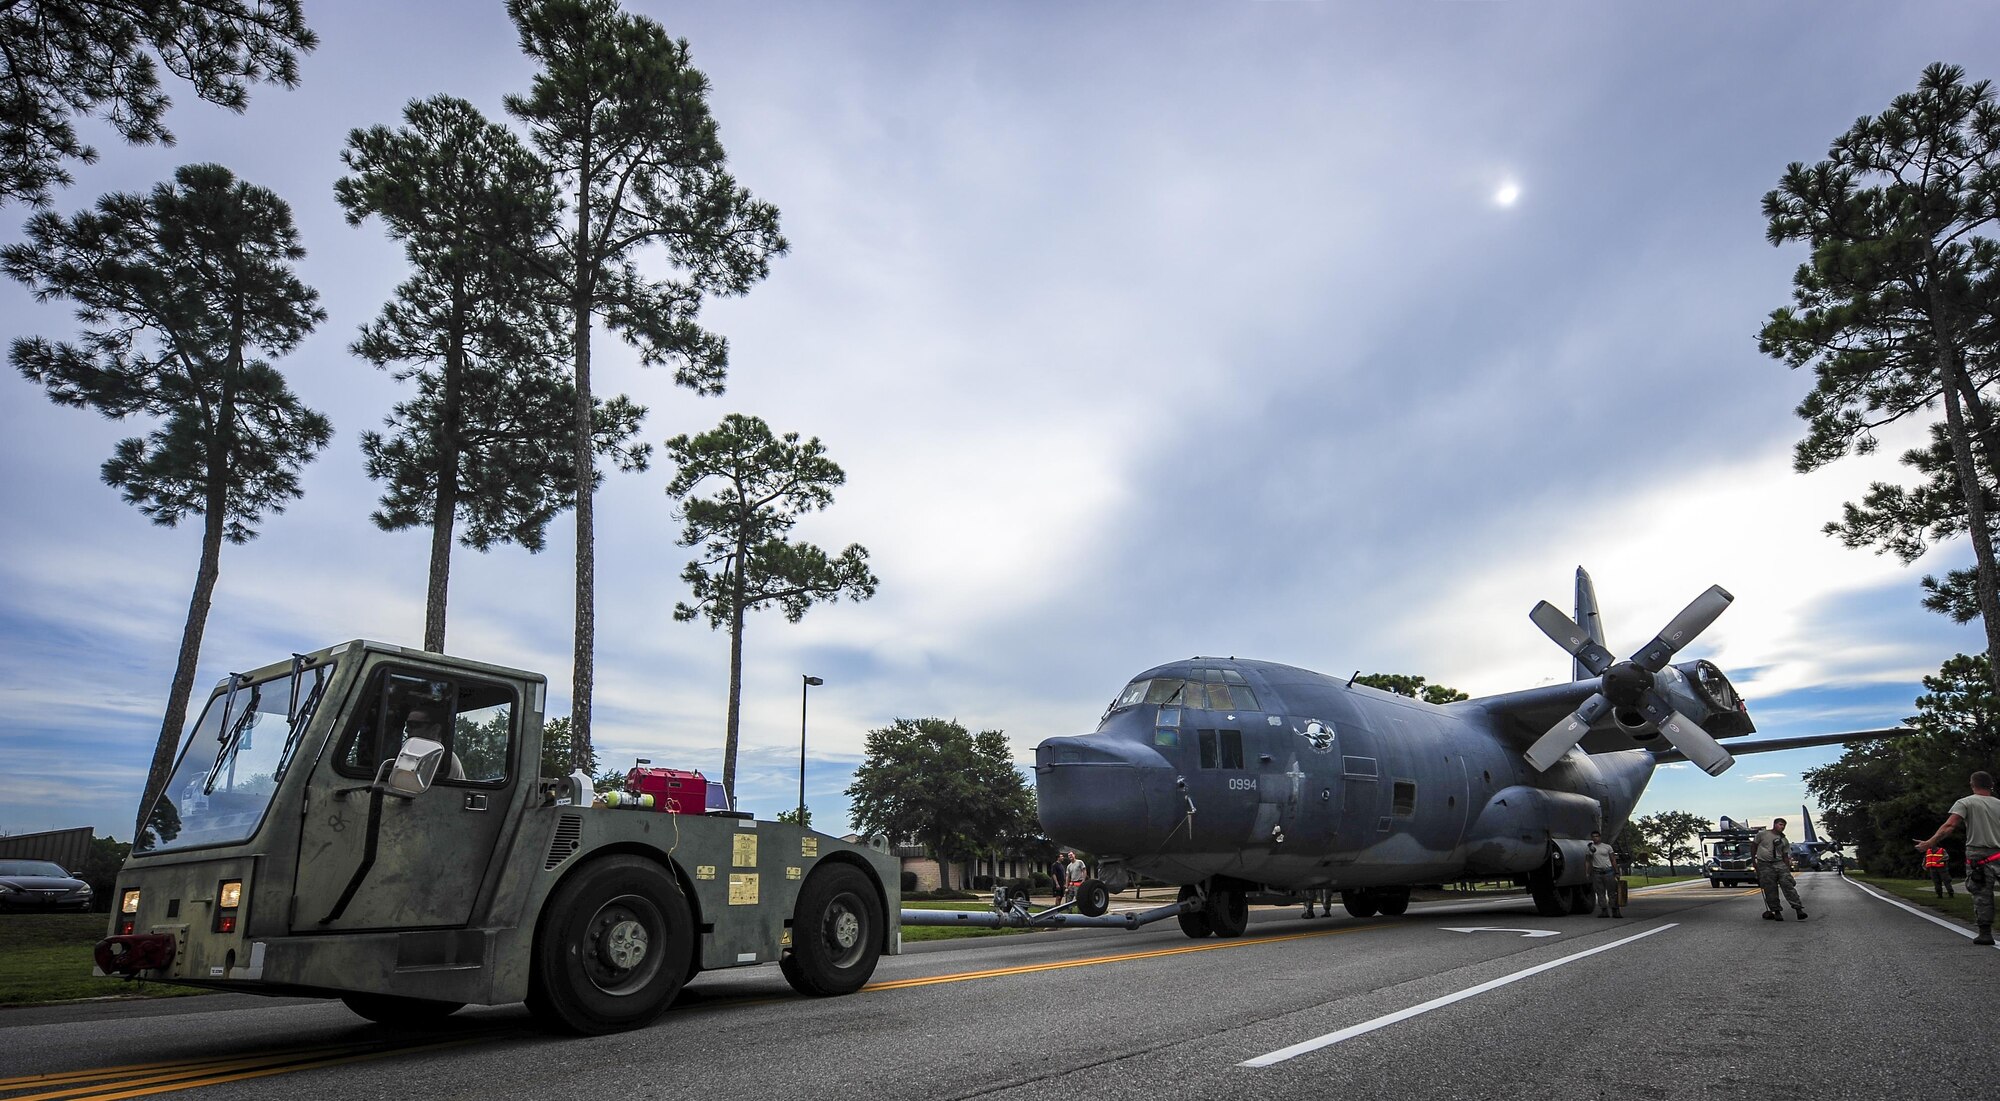 An AC-130H Spectre is towed down Independence Road on Hurlburt Field, Fla., Aug. 15, 2015. The Spectre was towed from the flightline and staged for installation into the Hurlburt Field Air Park. The AC-130H fleet retired May 26, 2015, after more than 45 years of service. The installation process for this aircraft, known as “Wicked Wanda,” is set to be complete by Aug. 28, 2015. (U.S. Air Force photo by Senior Airman Meagan Schutter/Released)